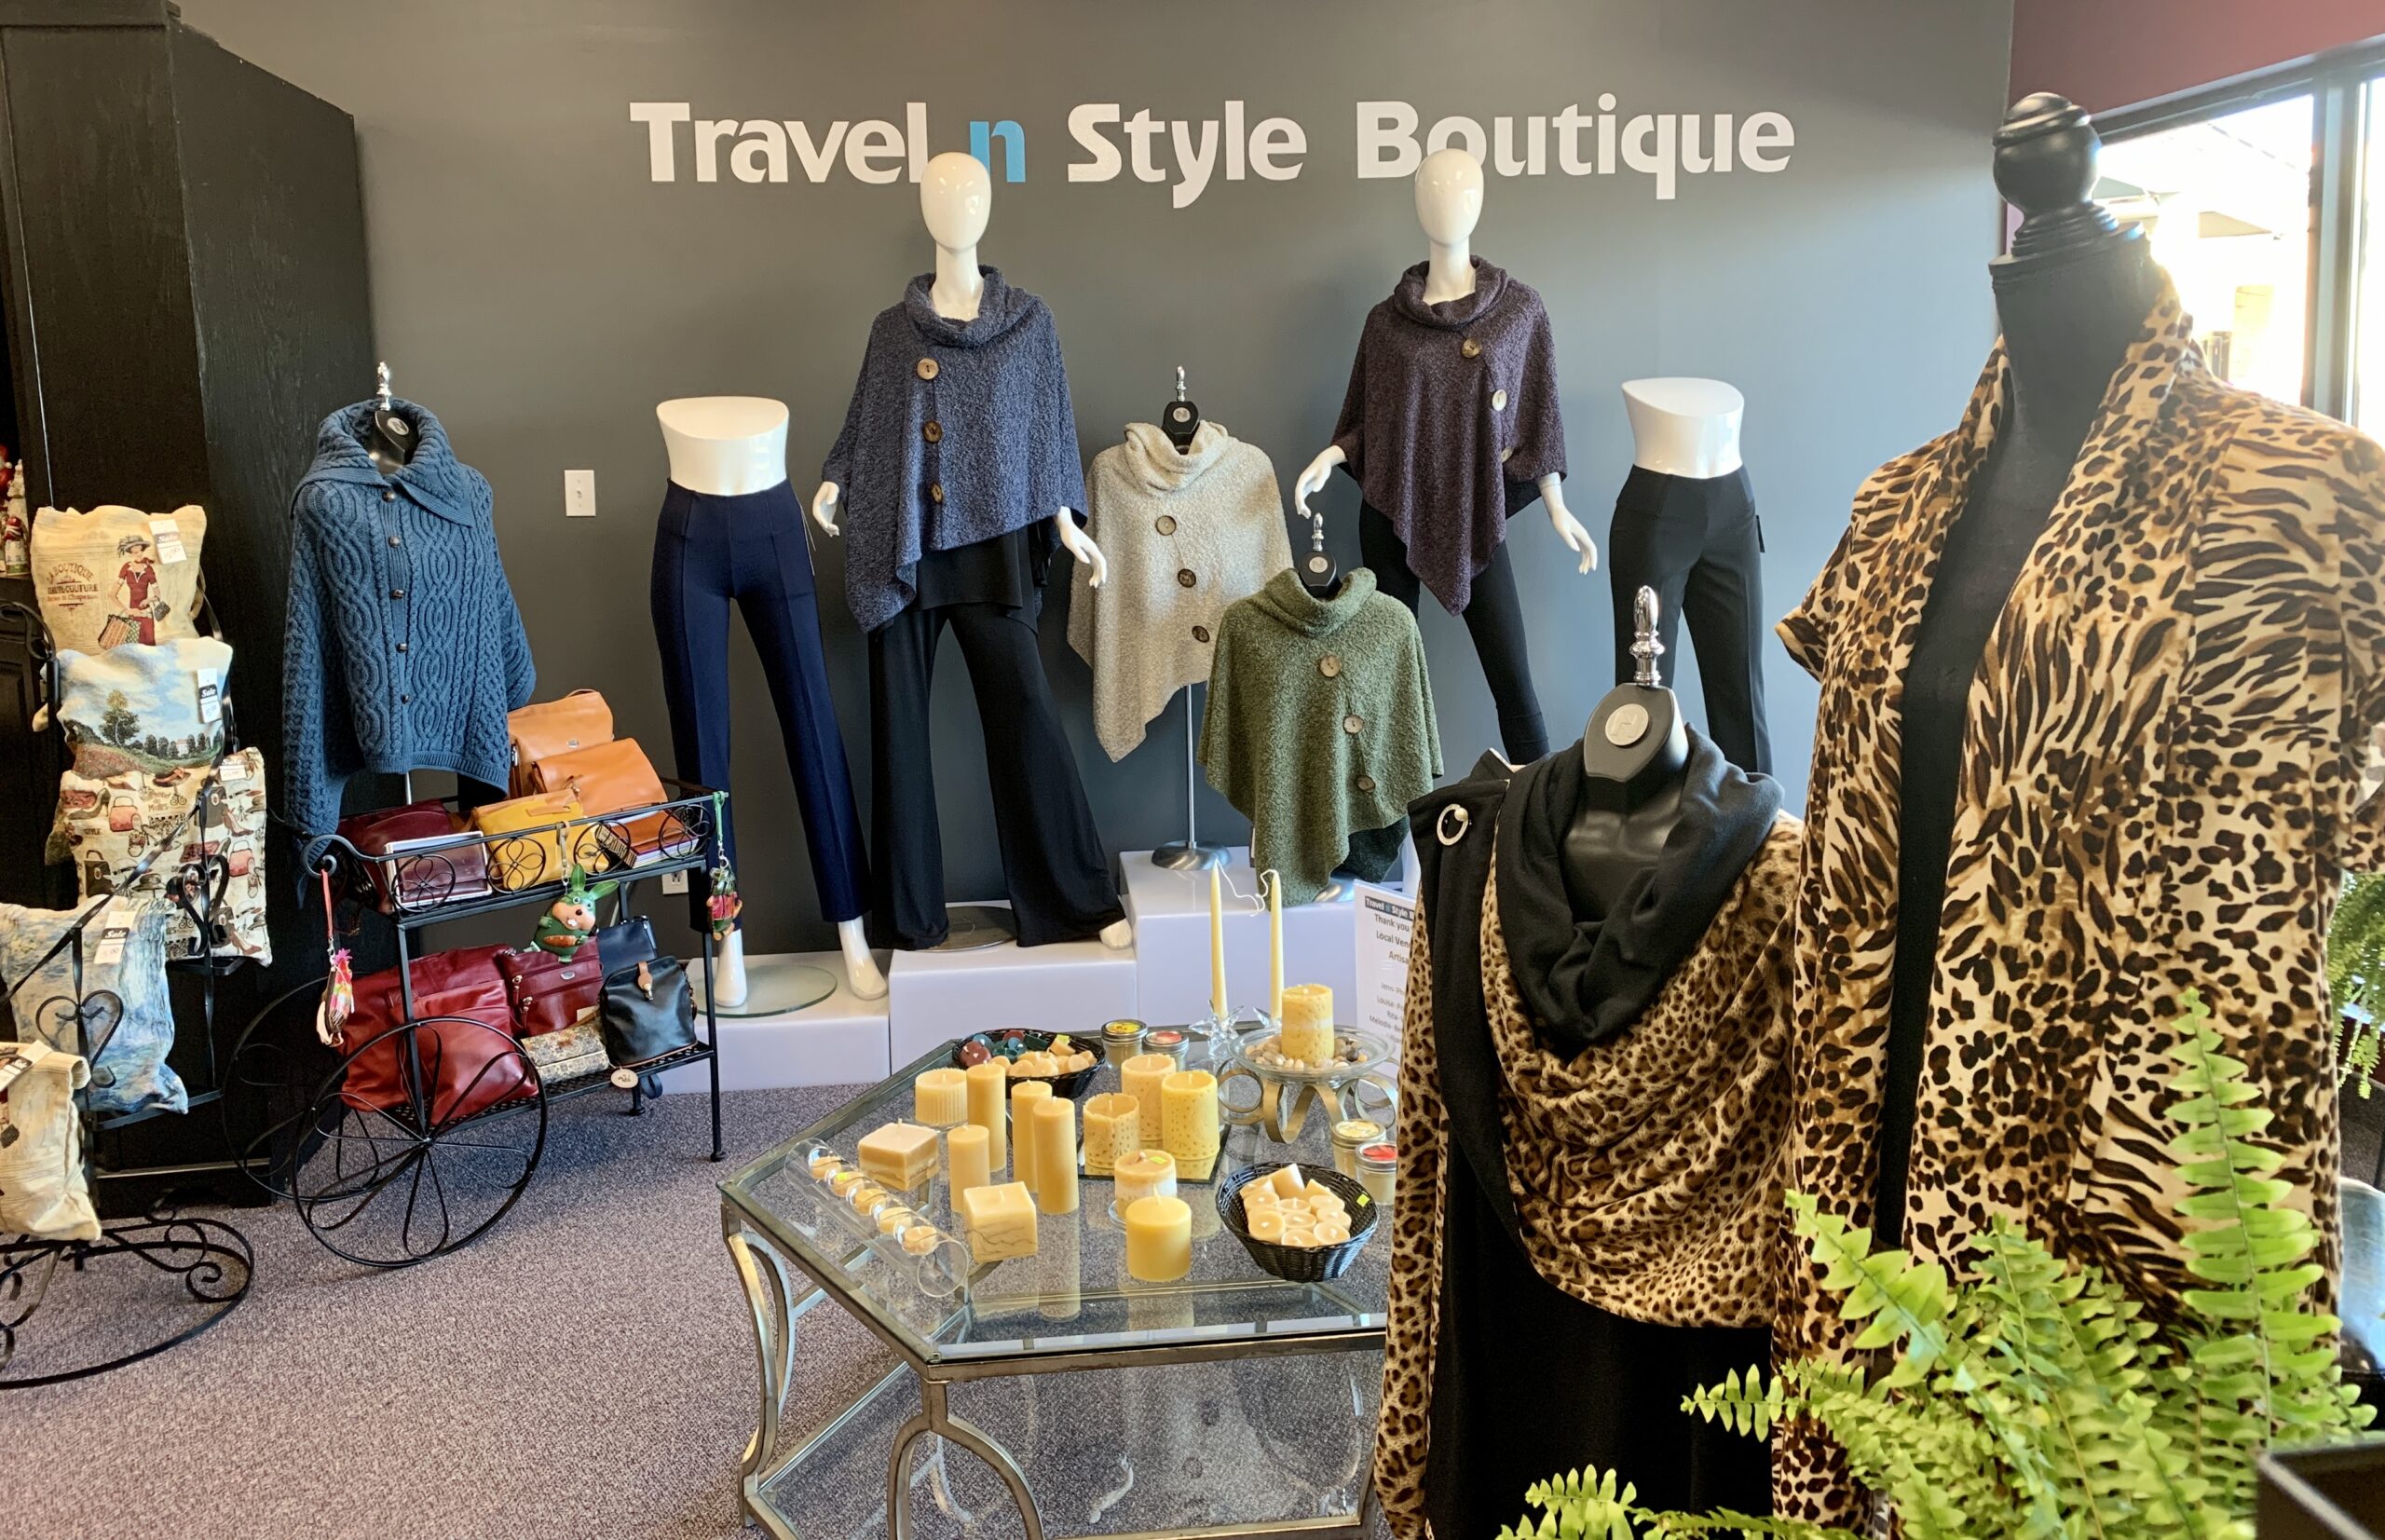 travel n style boutique's clothes and gift items on display